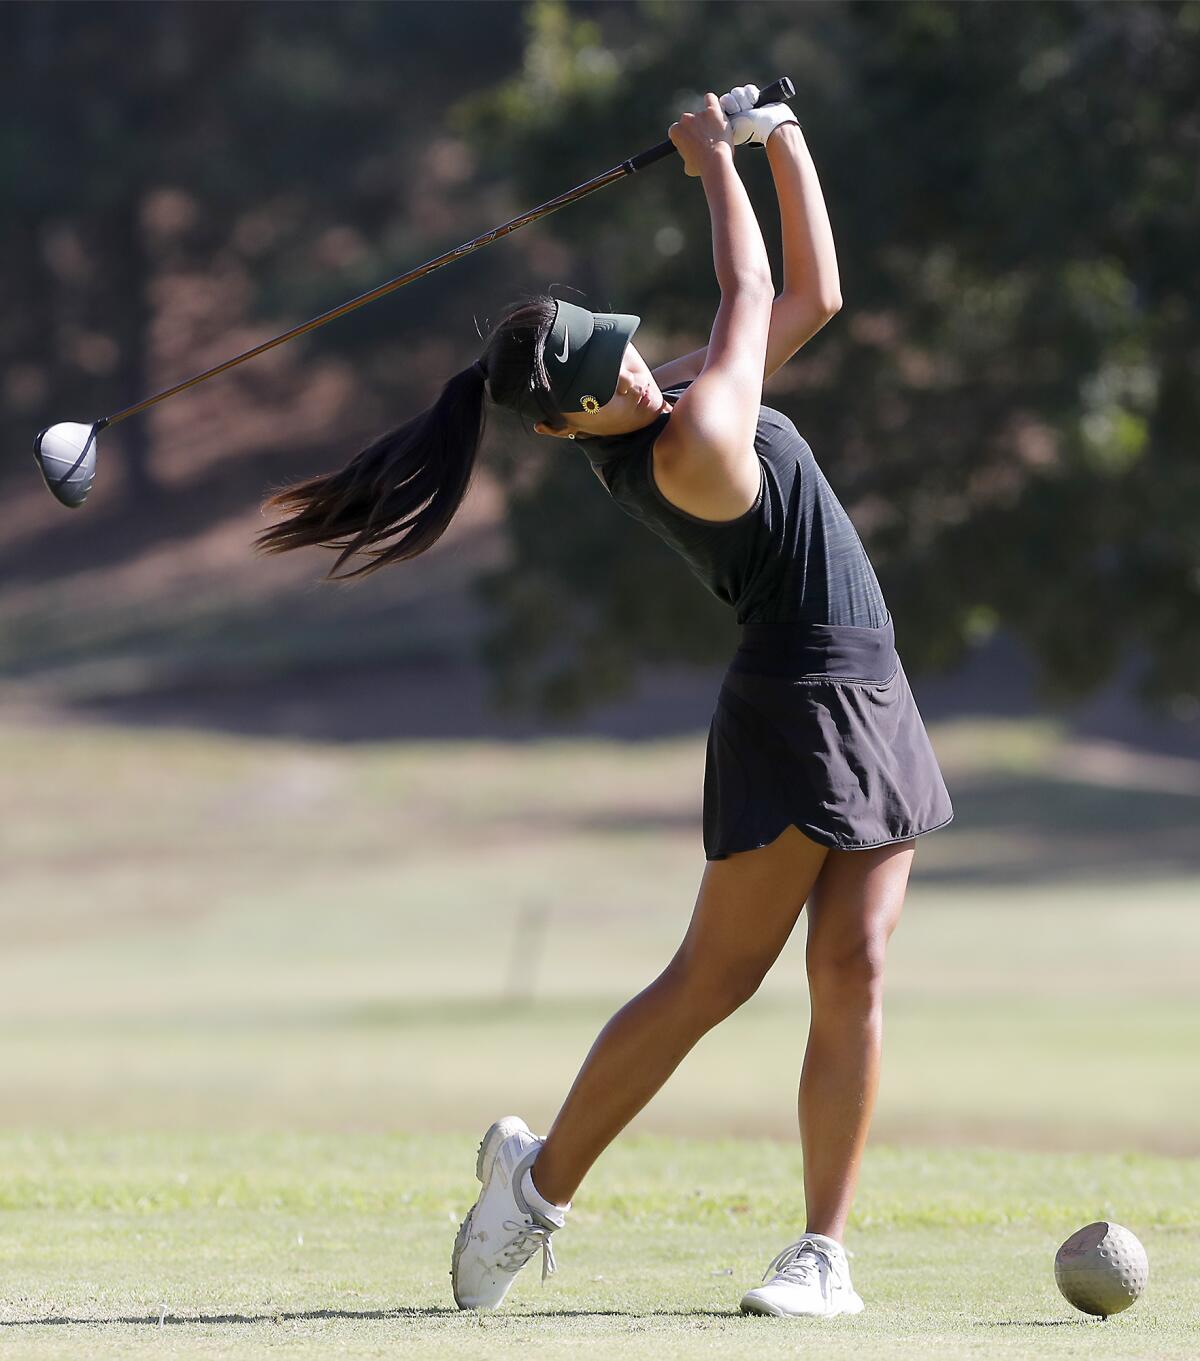 Edison's Chaemin Kim tees off the 11th hole in the CIF Southern Section Individual Southern Regional tournament at Los Serranos Country Club in Chino Hills on Tuesday.